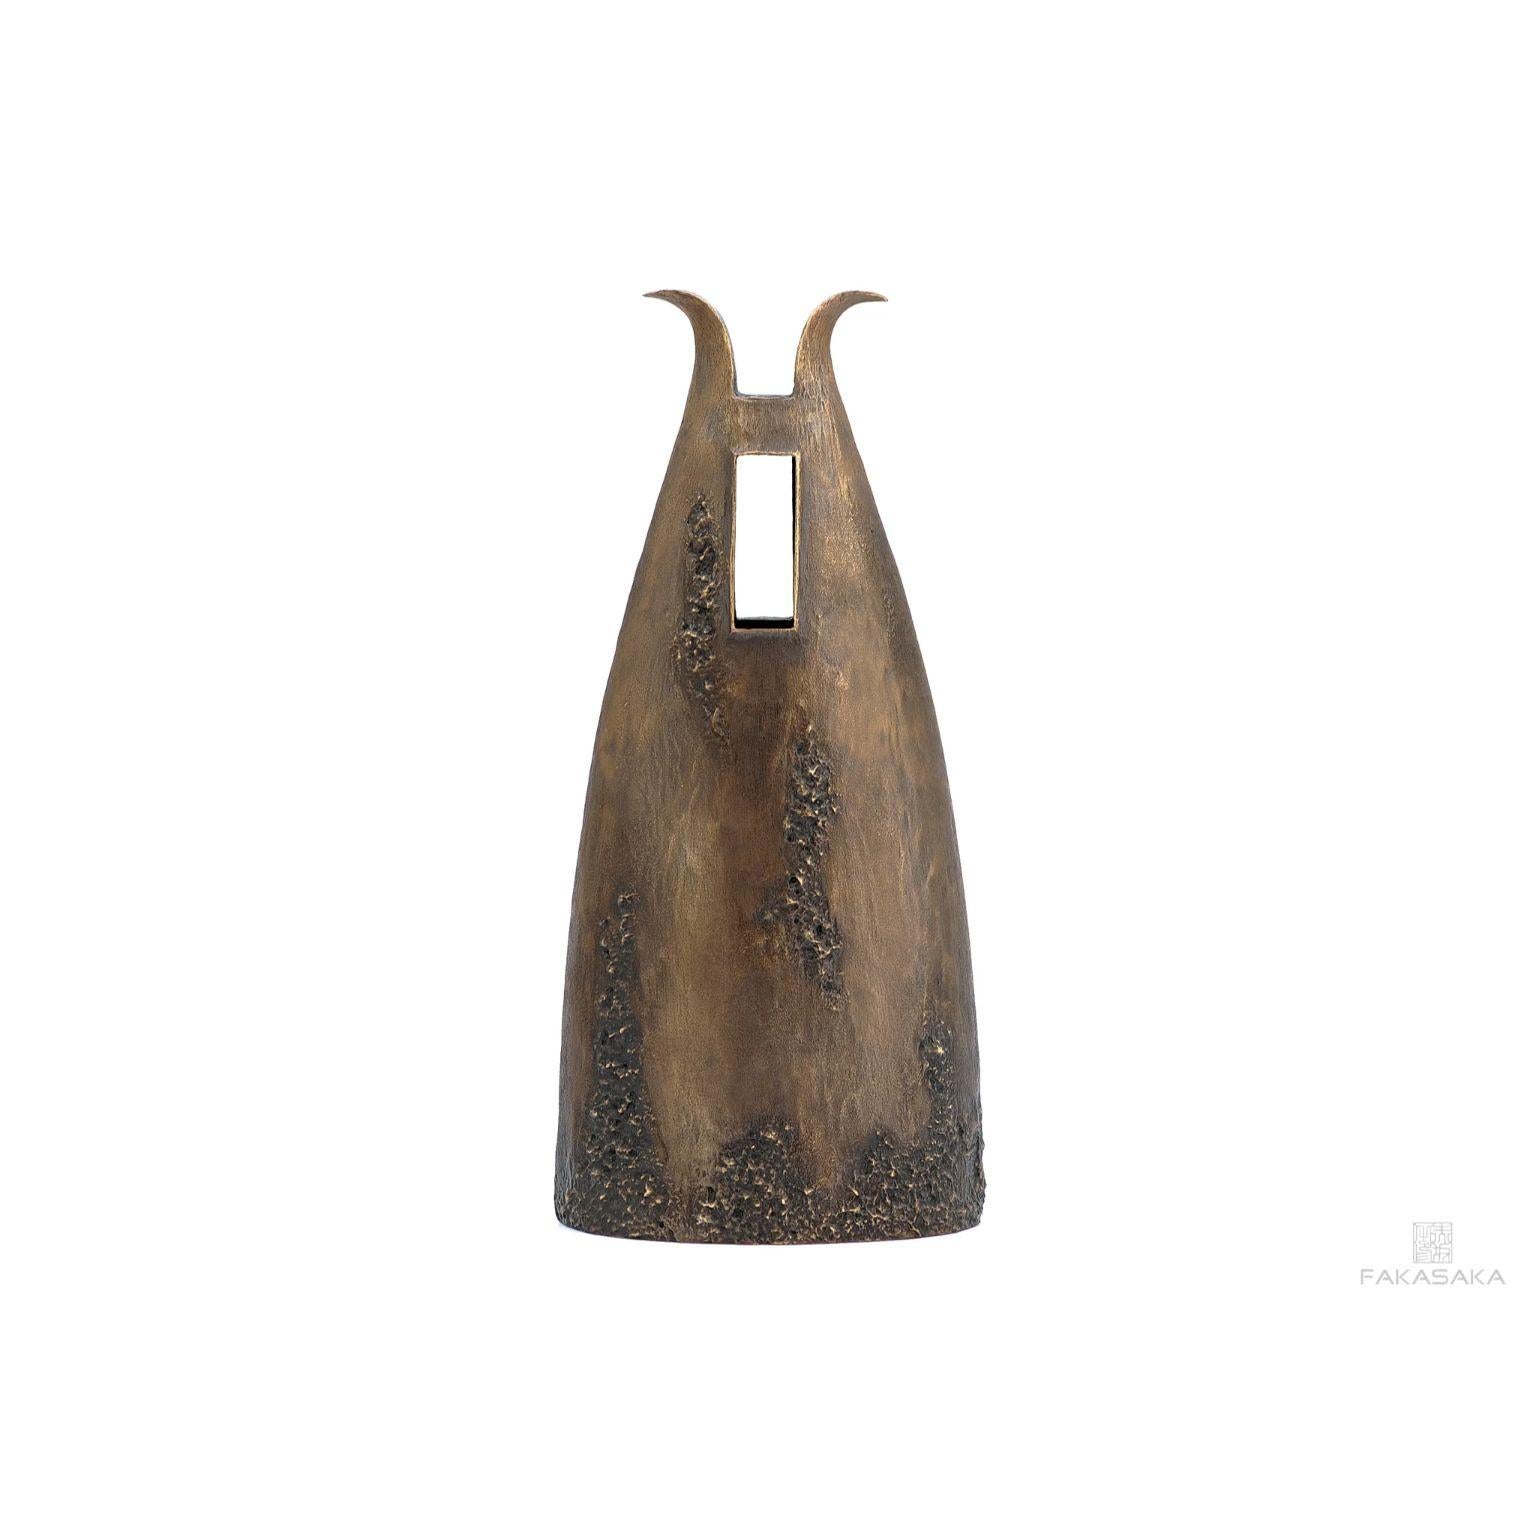 Garrym vase by Fakasaka Design
Dimensions: W 19 cm D 12 cm H 41.5 cm.
Materials: Dark Bronze.

 Fakasaka is a design company focused on production of high-end furniture, lighting, decorative objects, jewels, and accessories.

 Established in